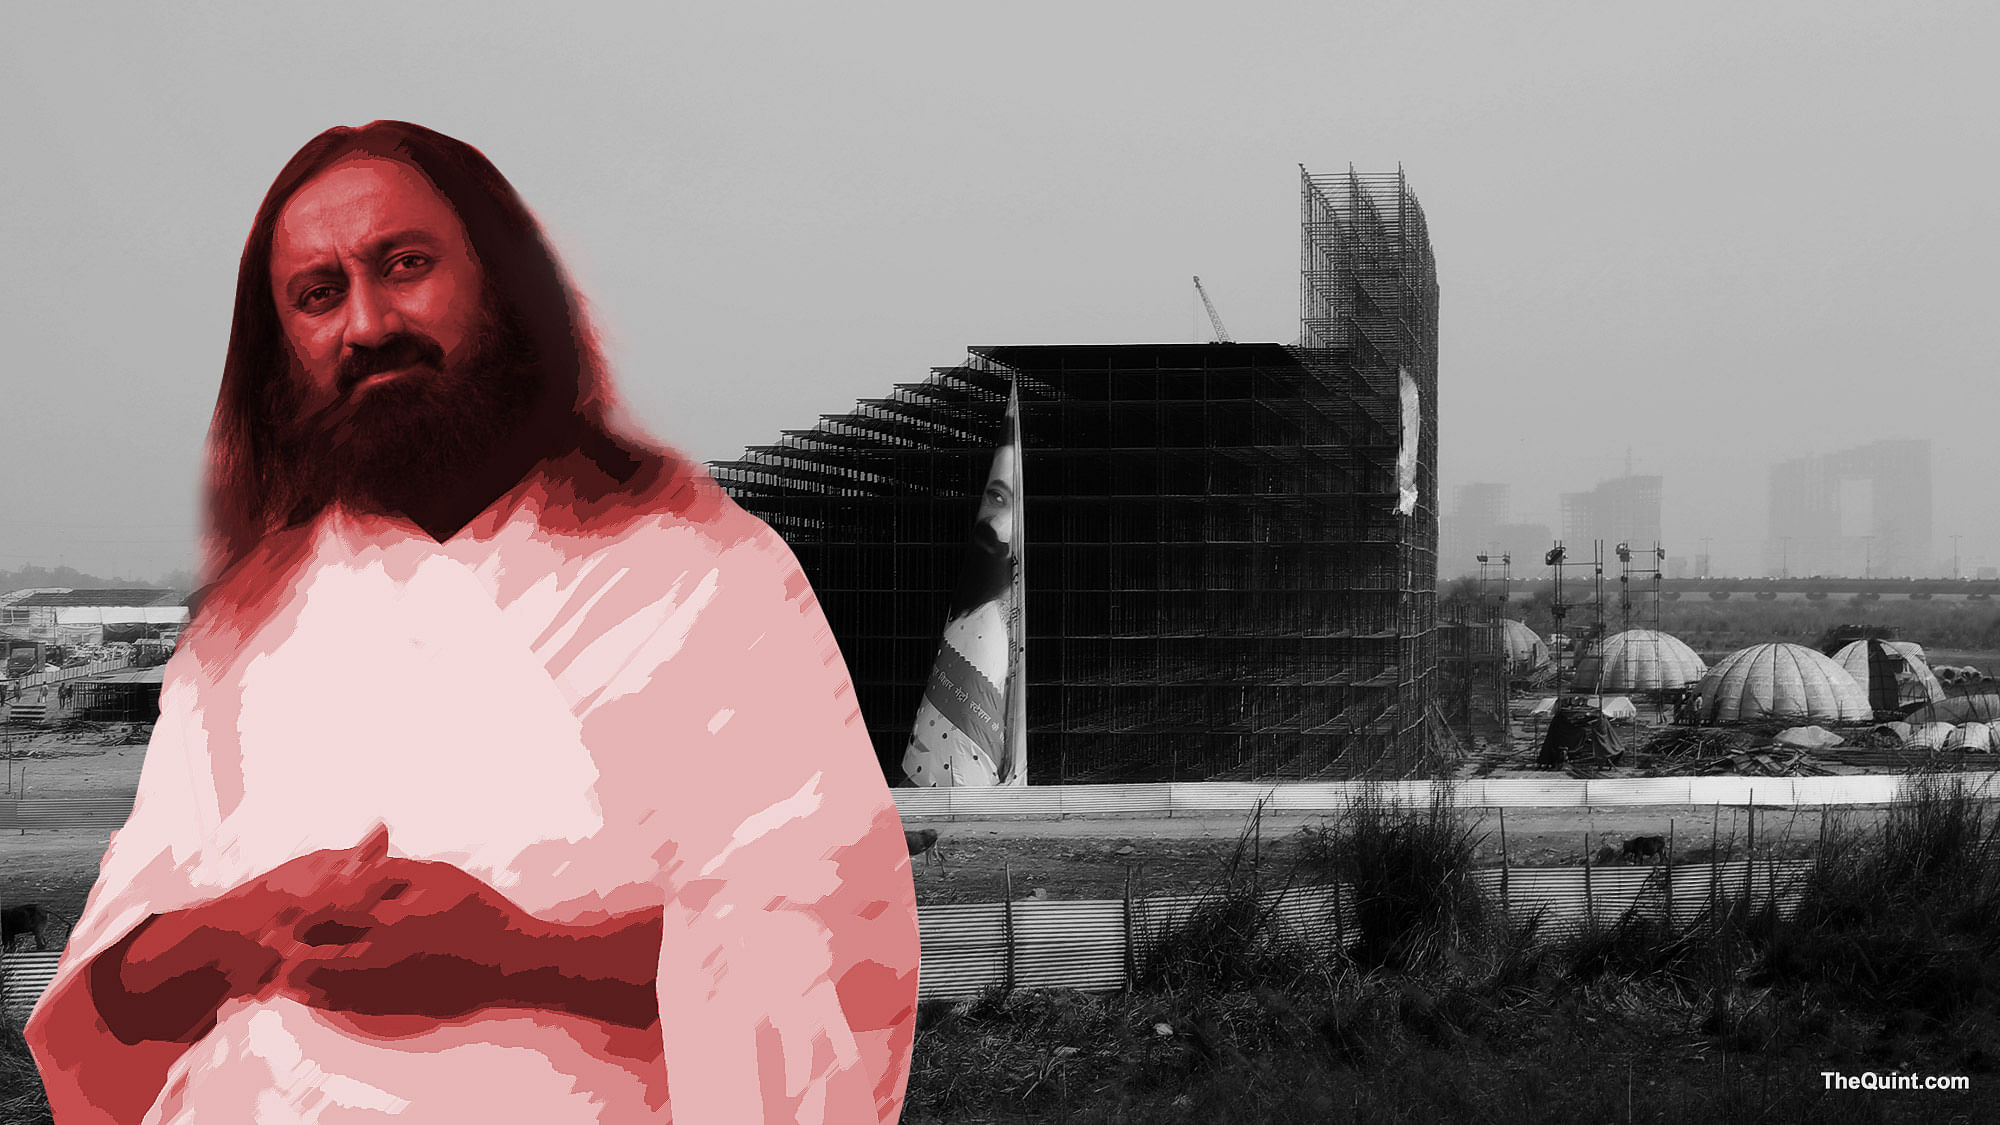 Sri Sri Ravi Shankar’s organisation is in the middle of a controversial case on the Yamuna Flood Plain (Photo altered by <b>The Quint</b>)